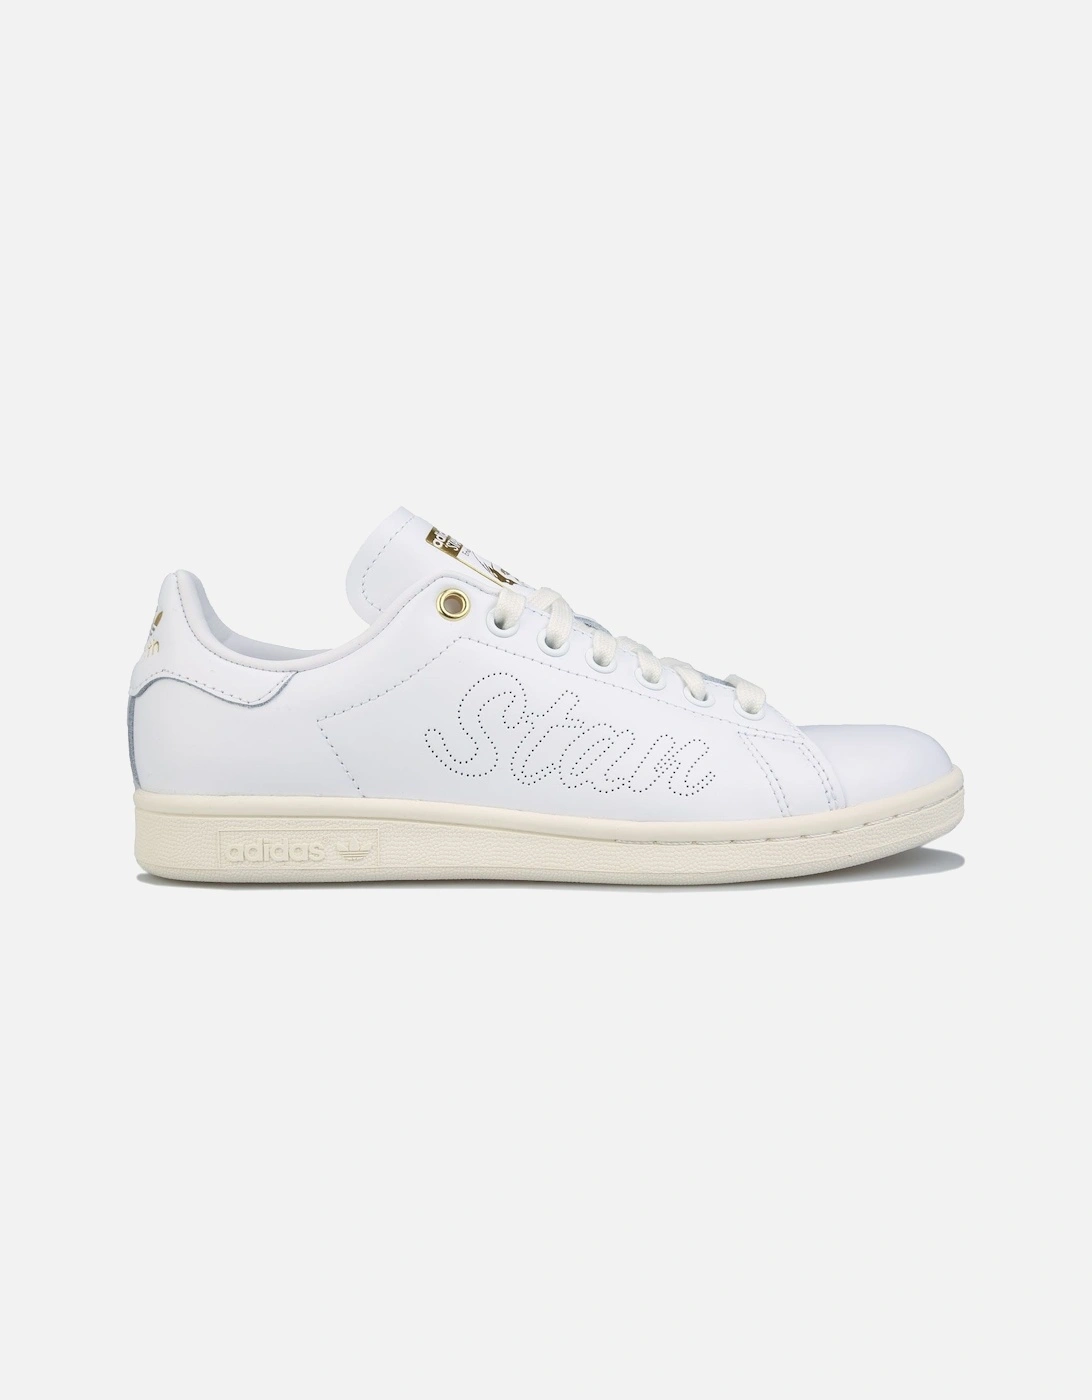 Women's Stan Smith Trainers - Womens Stan Smith Trainers - White Gold- [Size: UK 3.5 only]